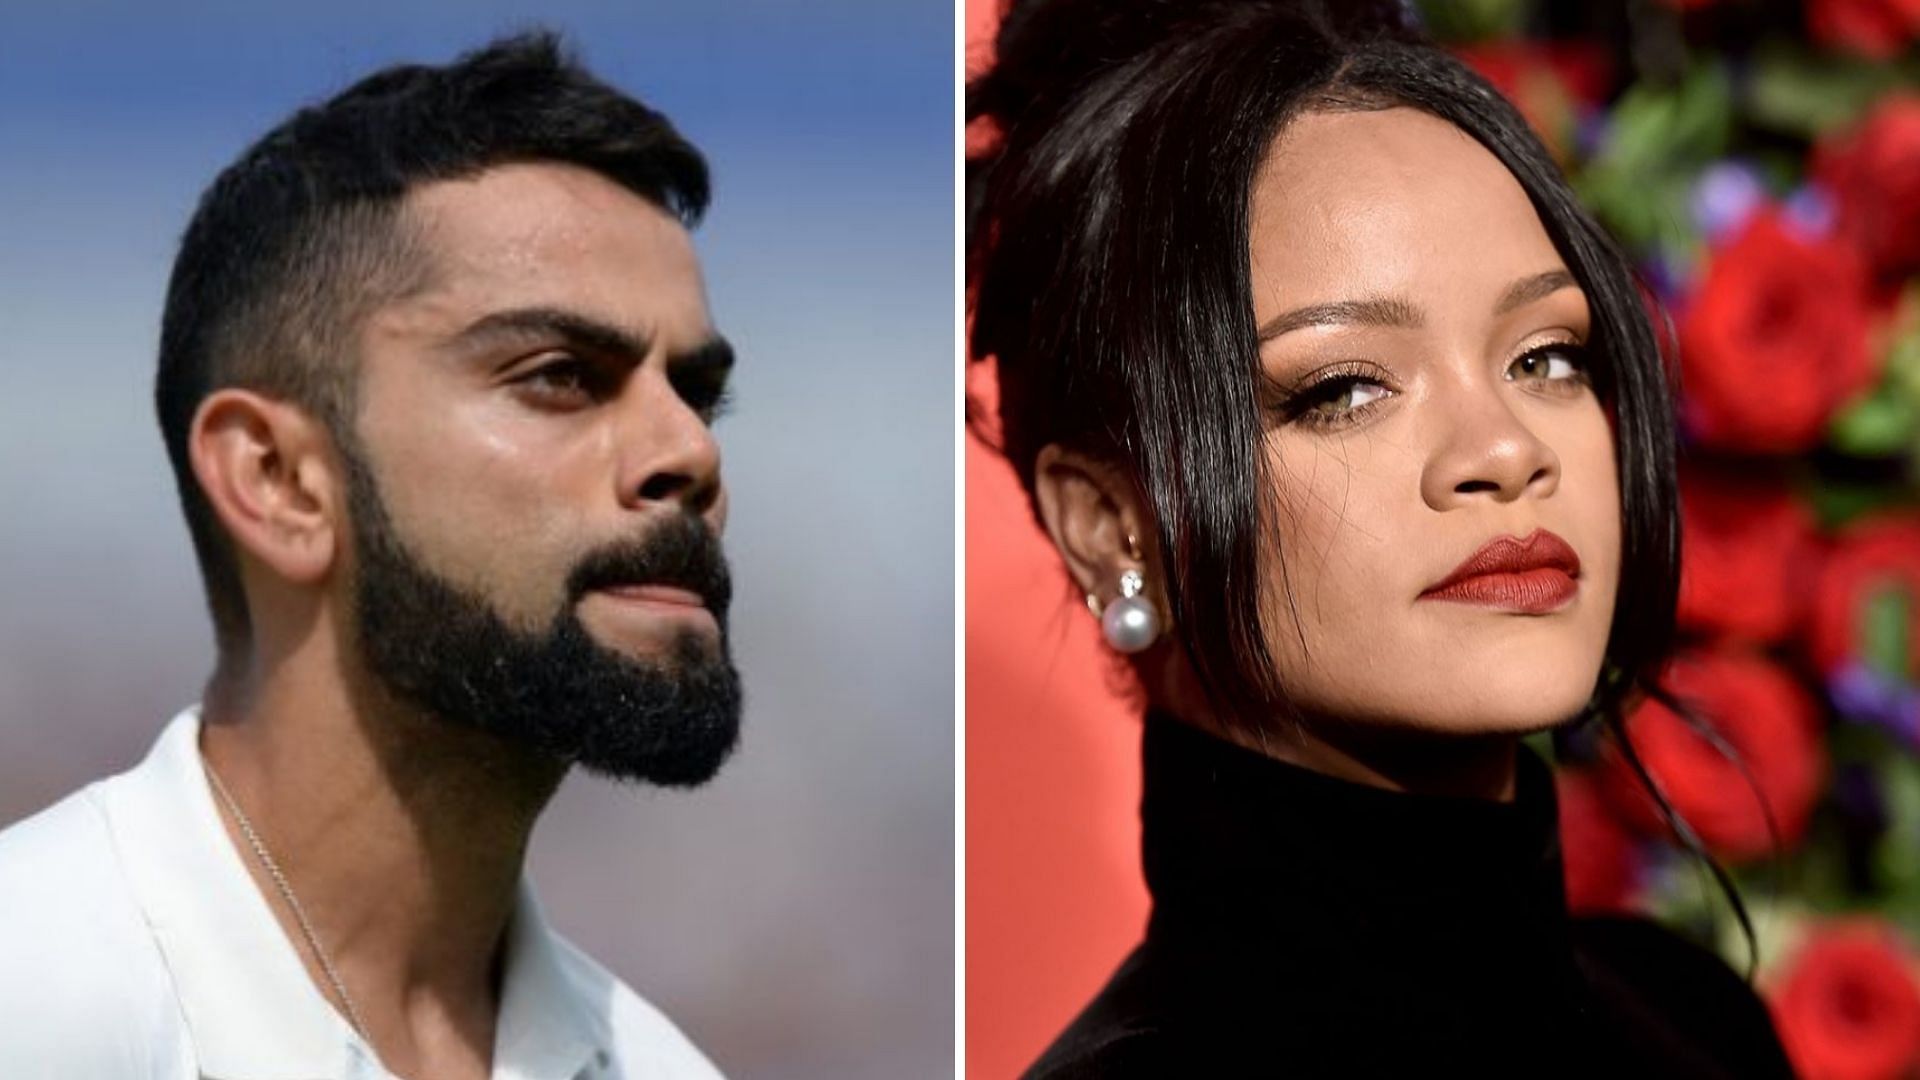 Joining the group of Indian public figures, Indian Cricket Captain Virat Kohli also tweeted under the “India Together” hashtag, after Rihanna tweeted in support of farmer’s protest, on Thursday, 3 February.